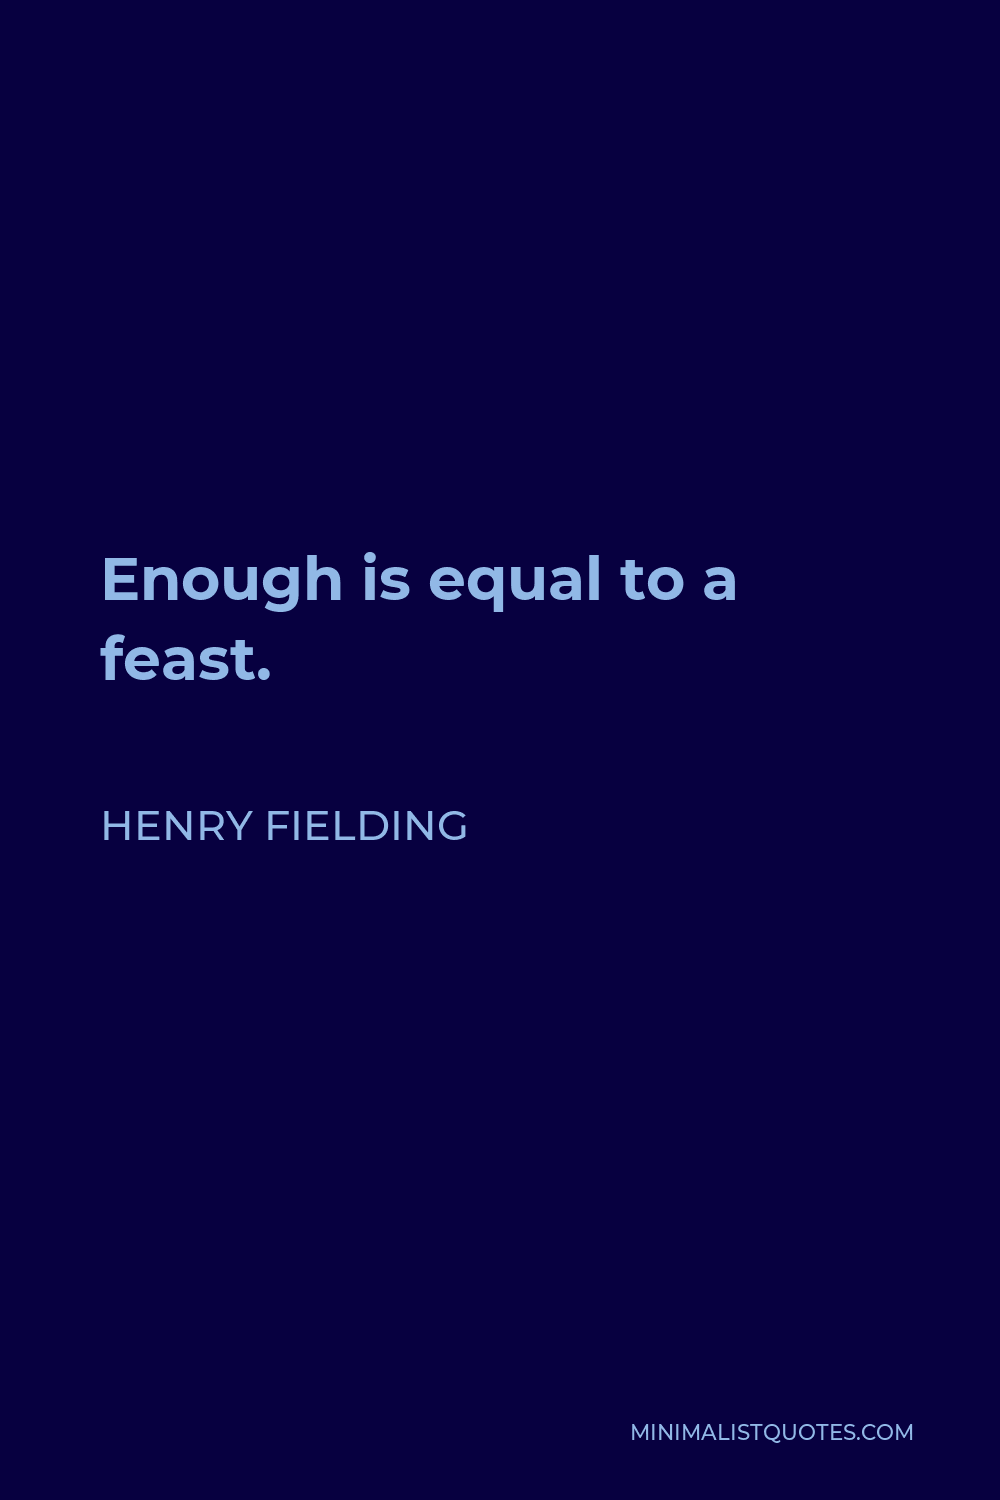 Henry Fielding Quote - Enough is equal to a feast.